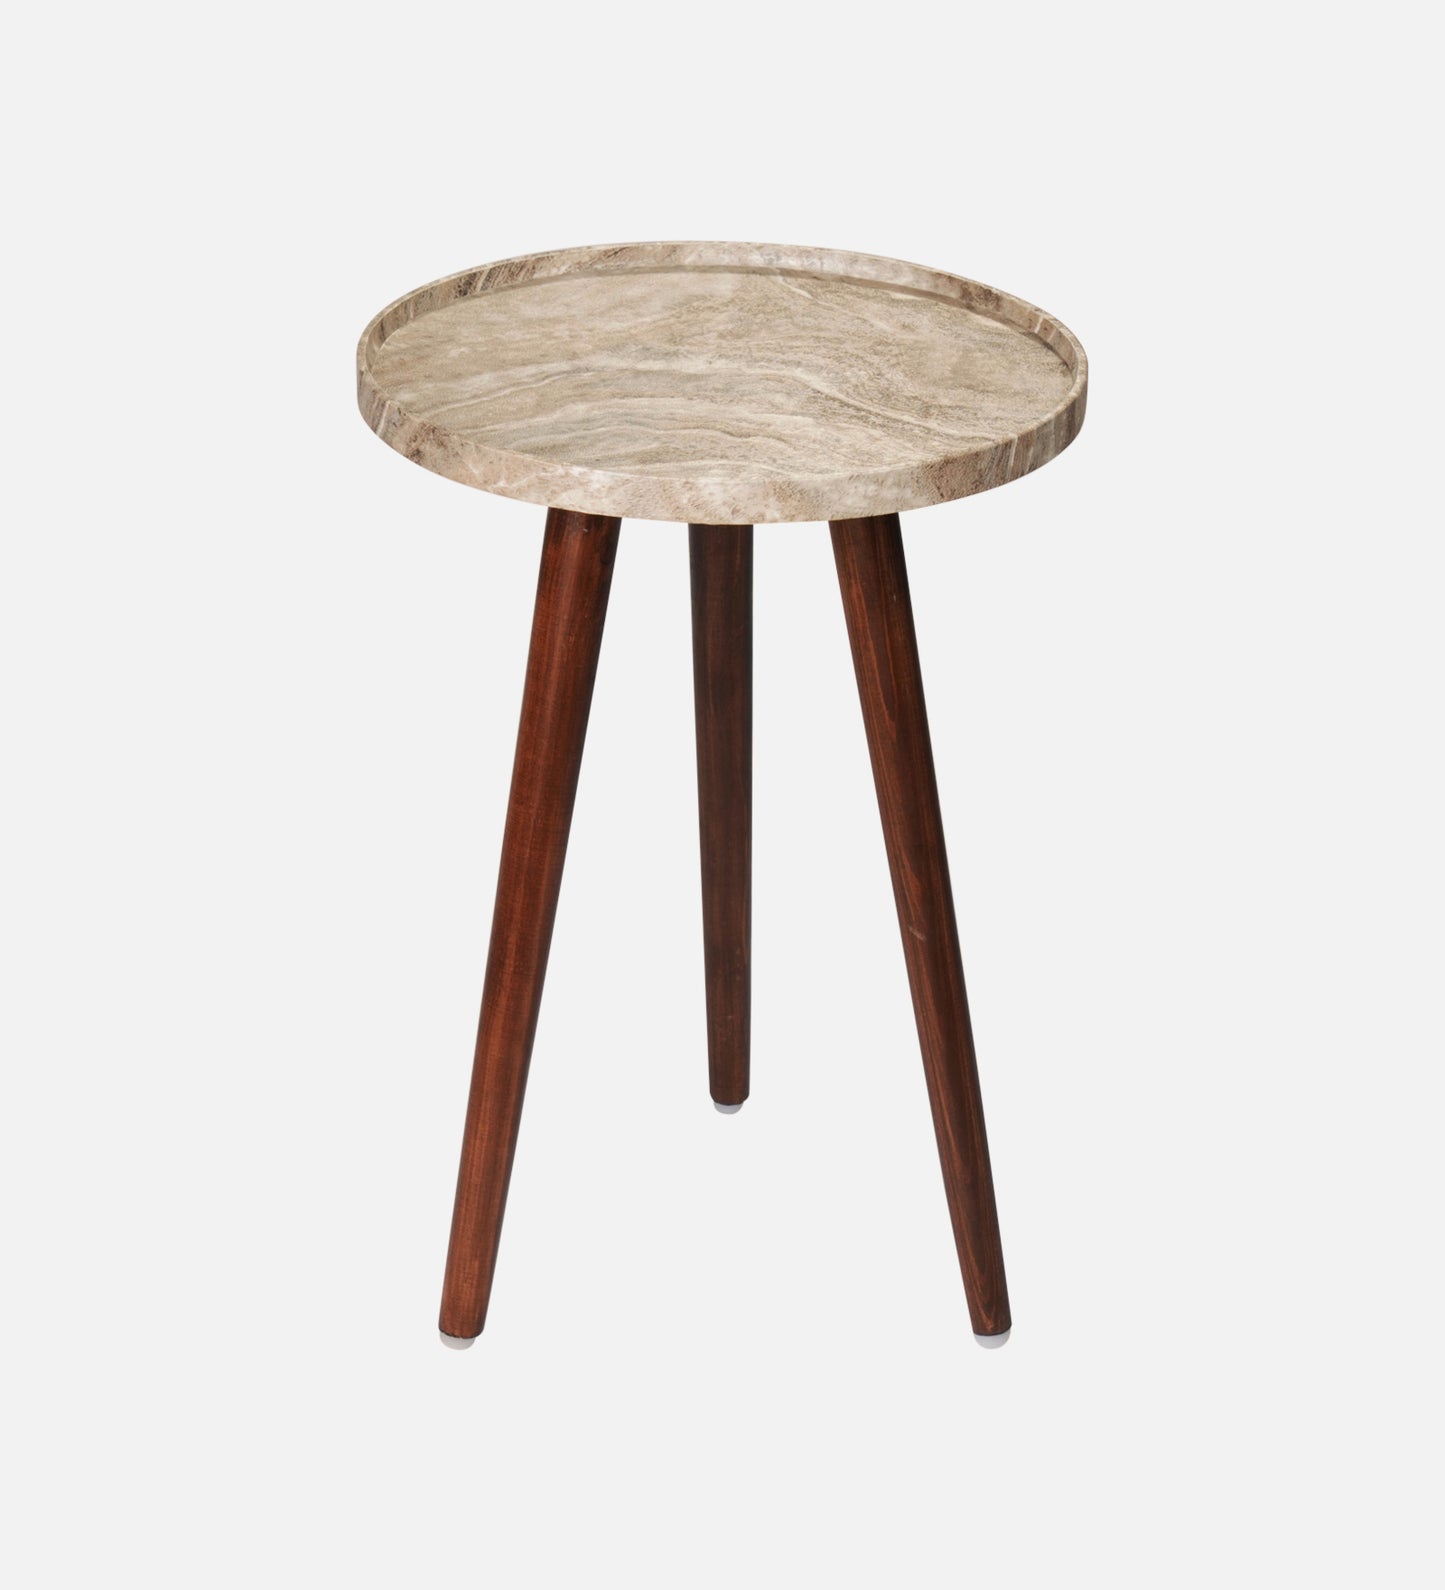 Oasis Inverse Round Nesting Tables with Wooden Legs, Side Tables, Wooden Tables, Living Room Decor by A Tiny Mistake